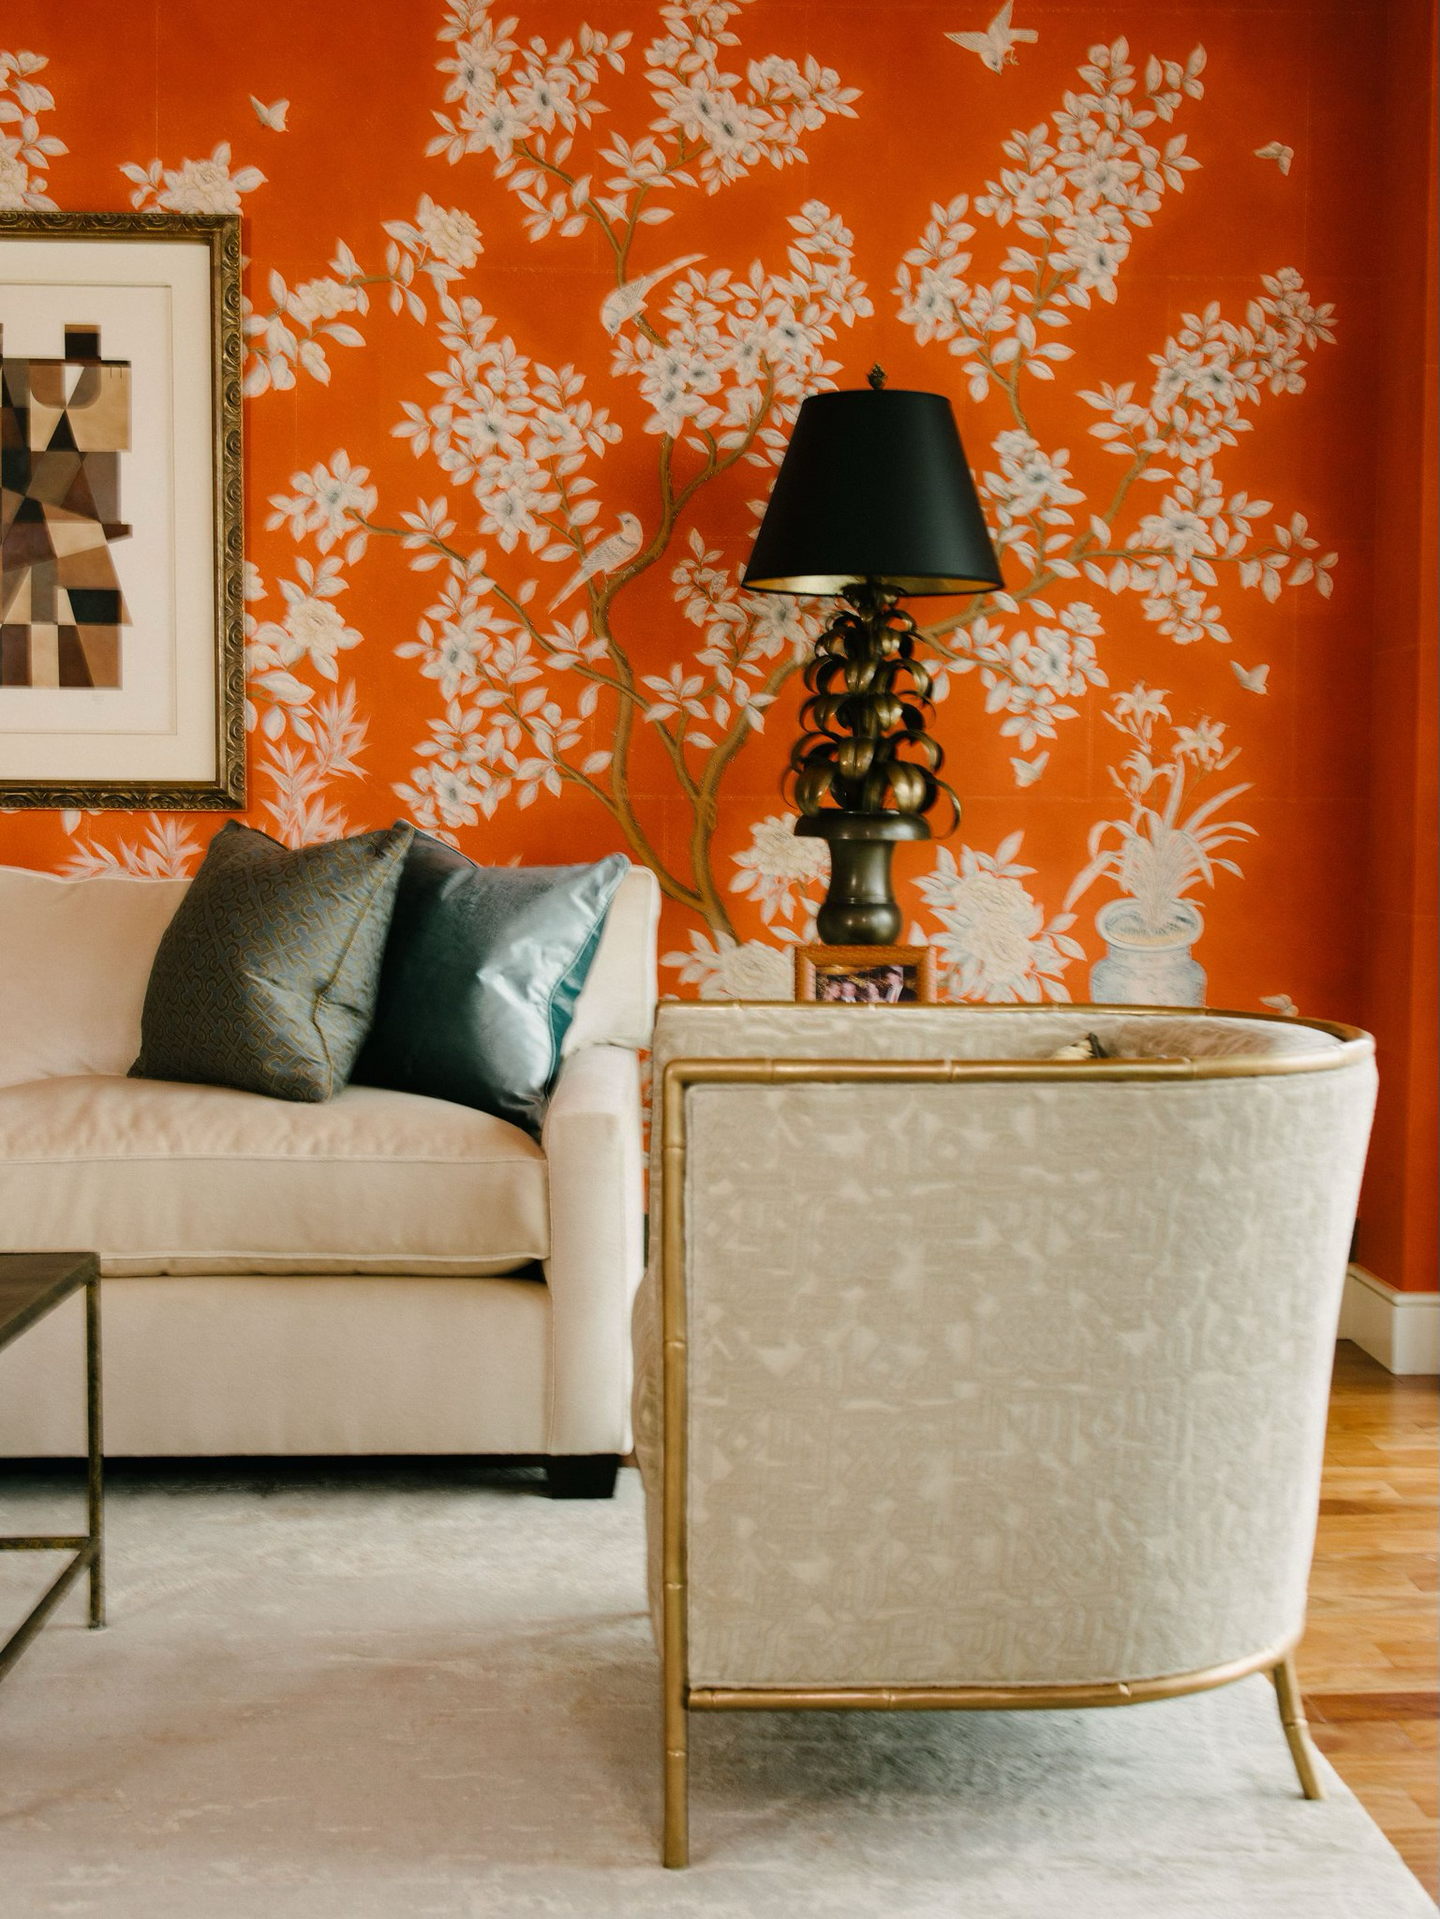 Wallpaper by Gracie Studios with furniture display